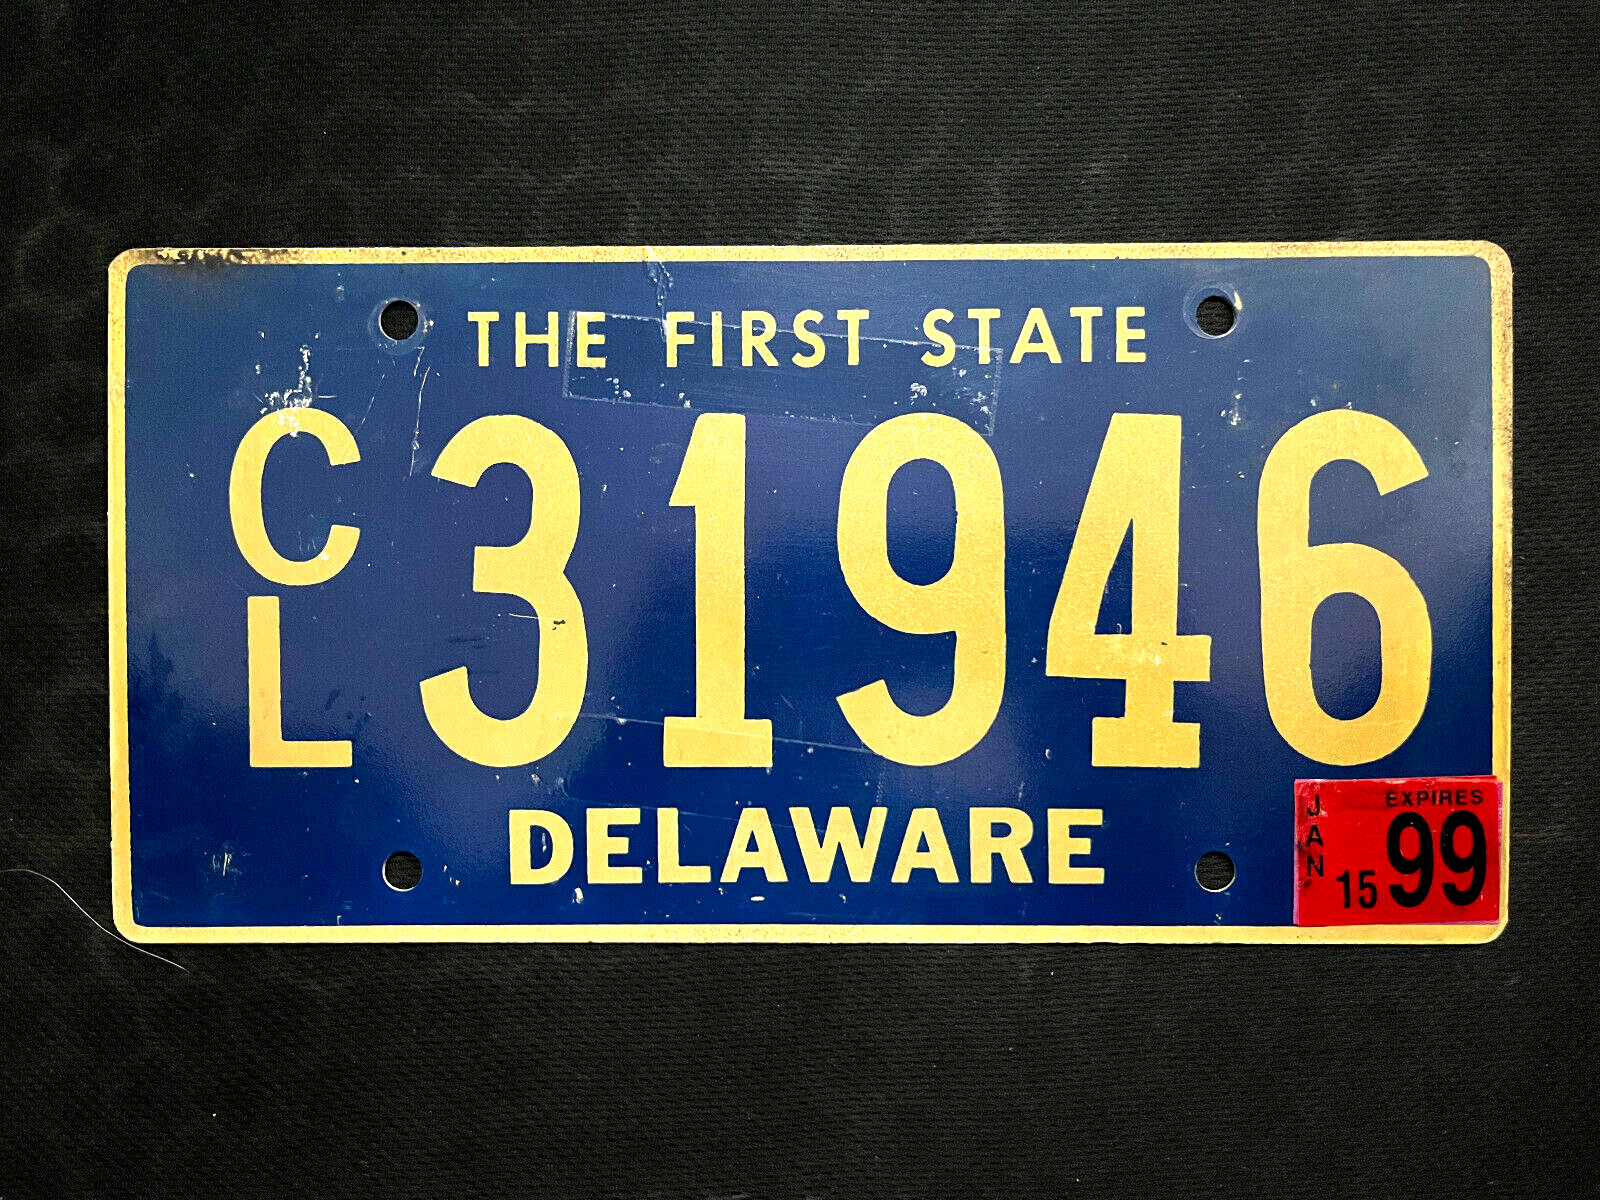 1999 Delaware License Plate CL31946 .. THE FIRST STATE, BEAUTIFUL YELLOW ON BLUE